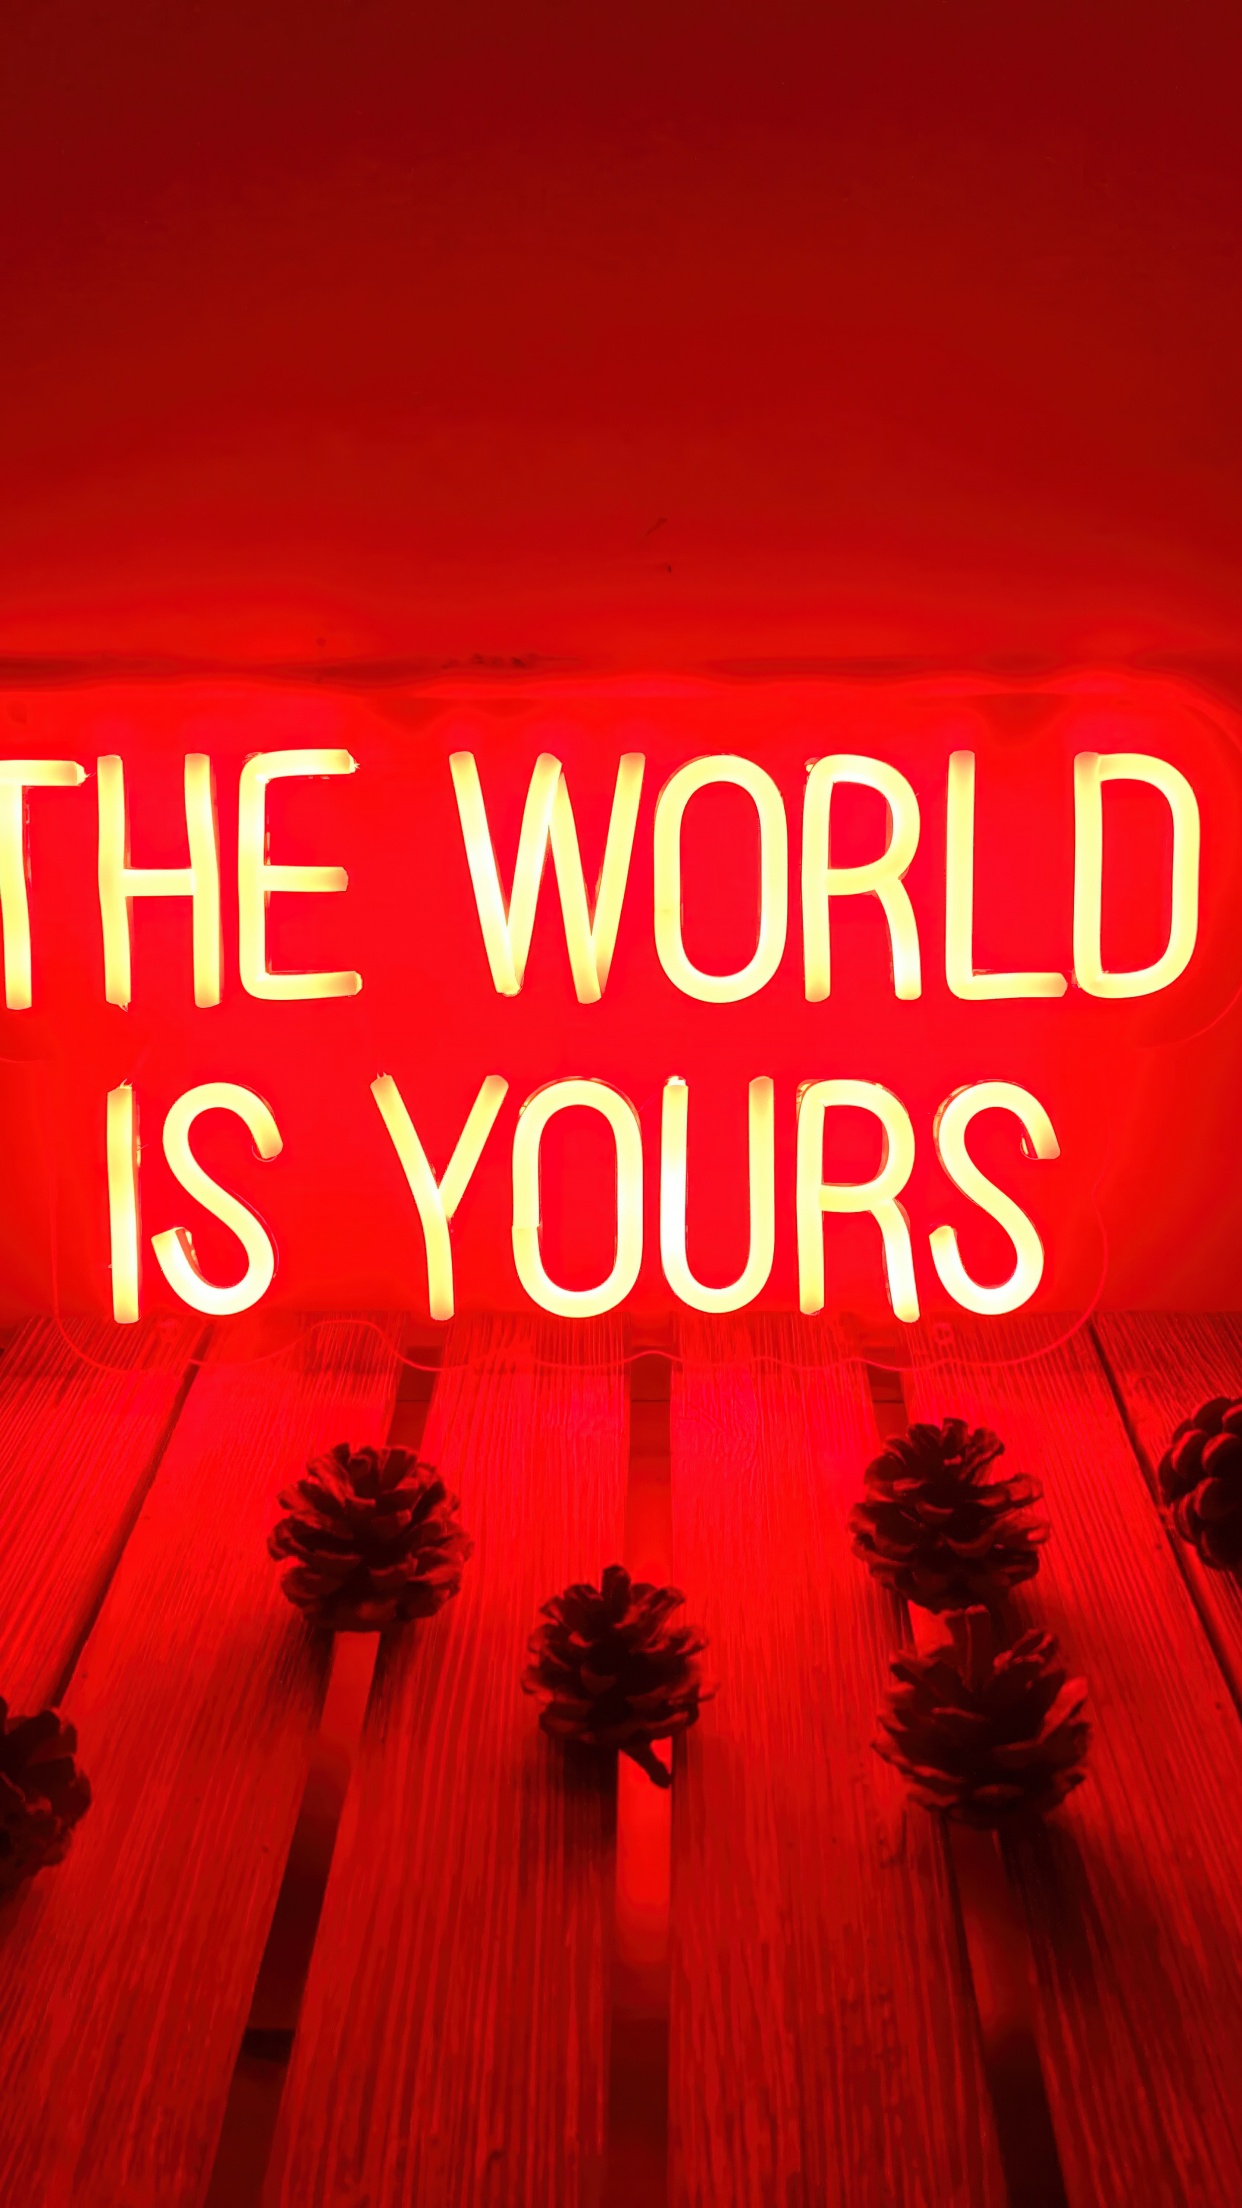 The world is yours by NANCHIN on Dribbble